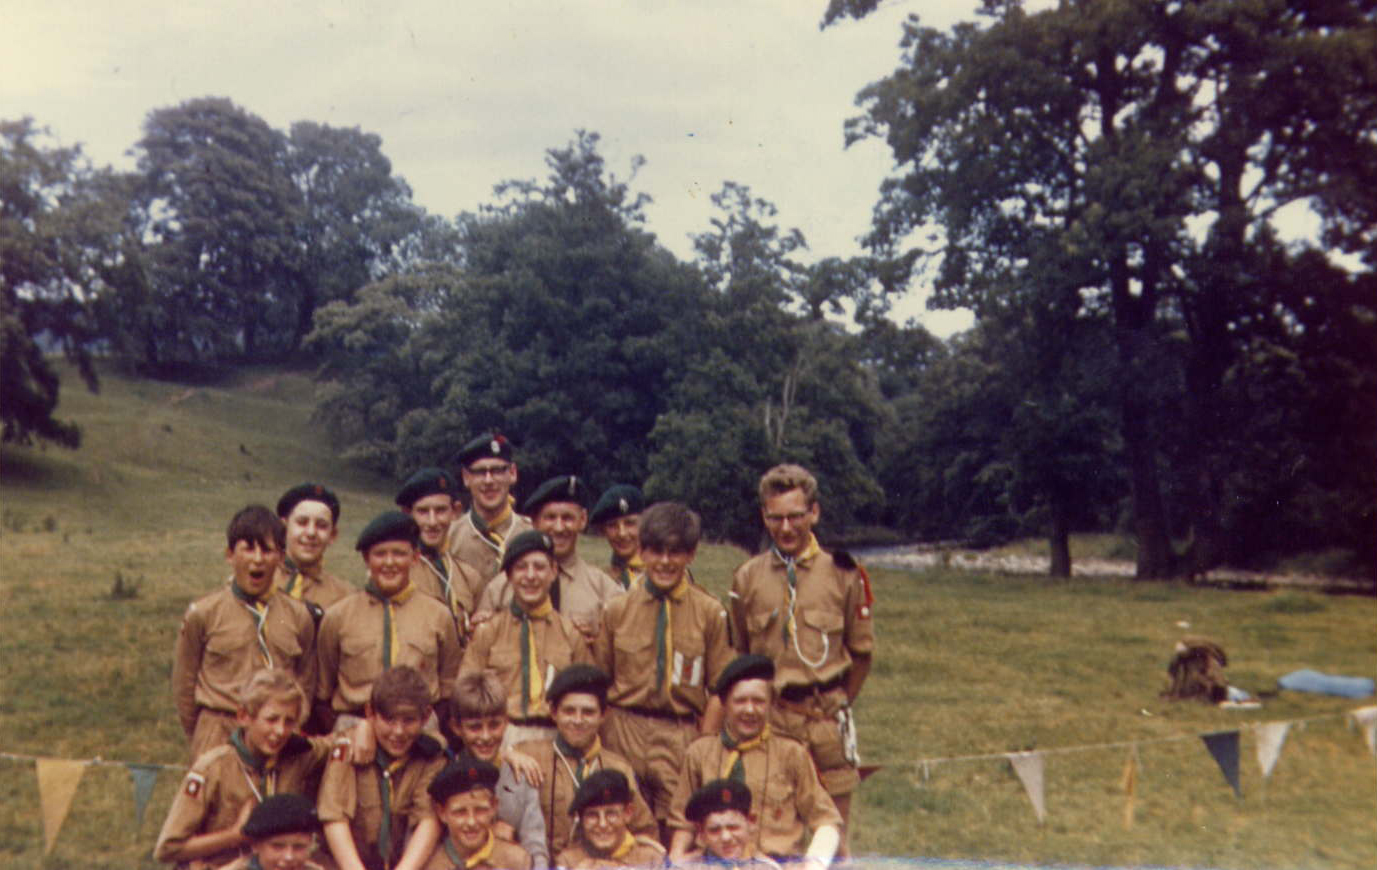 Normanby Methodist Boy Scouts Camp
- Click On This for Larger Image (Opens in New Window)